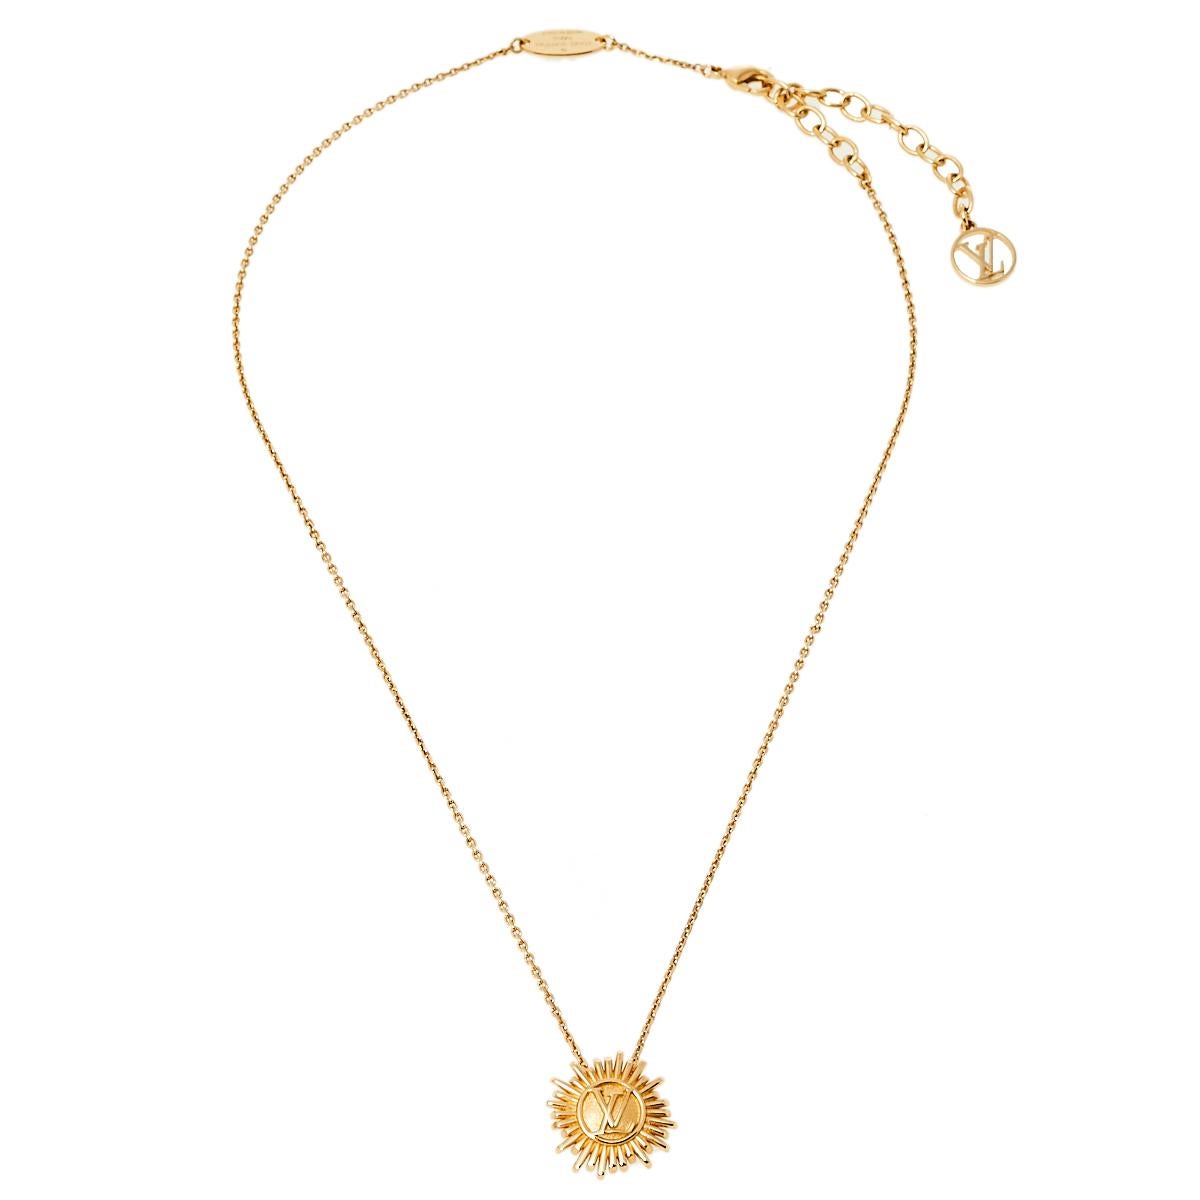 Let this dainty necklace by Loius Vuitton sit around your wrist and beautifully complement your ensembles. The creation comes in gold-tone metal and the chain holds an LV pendant. The lobster clasp secures the chain perfectly.

Includes: Original